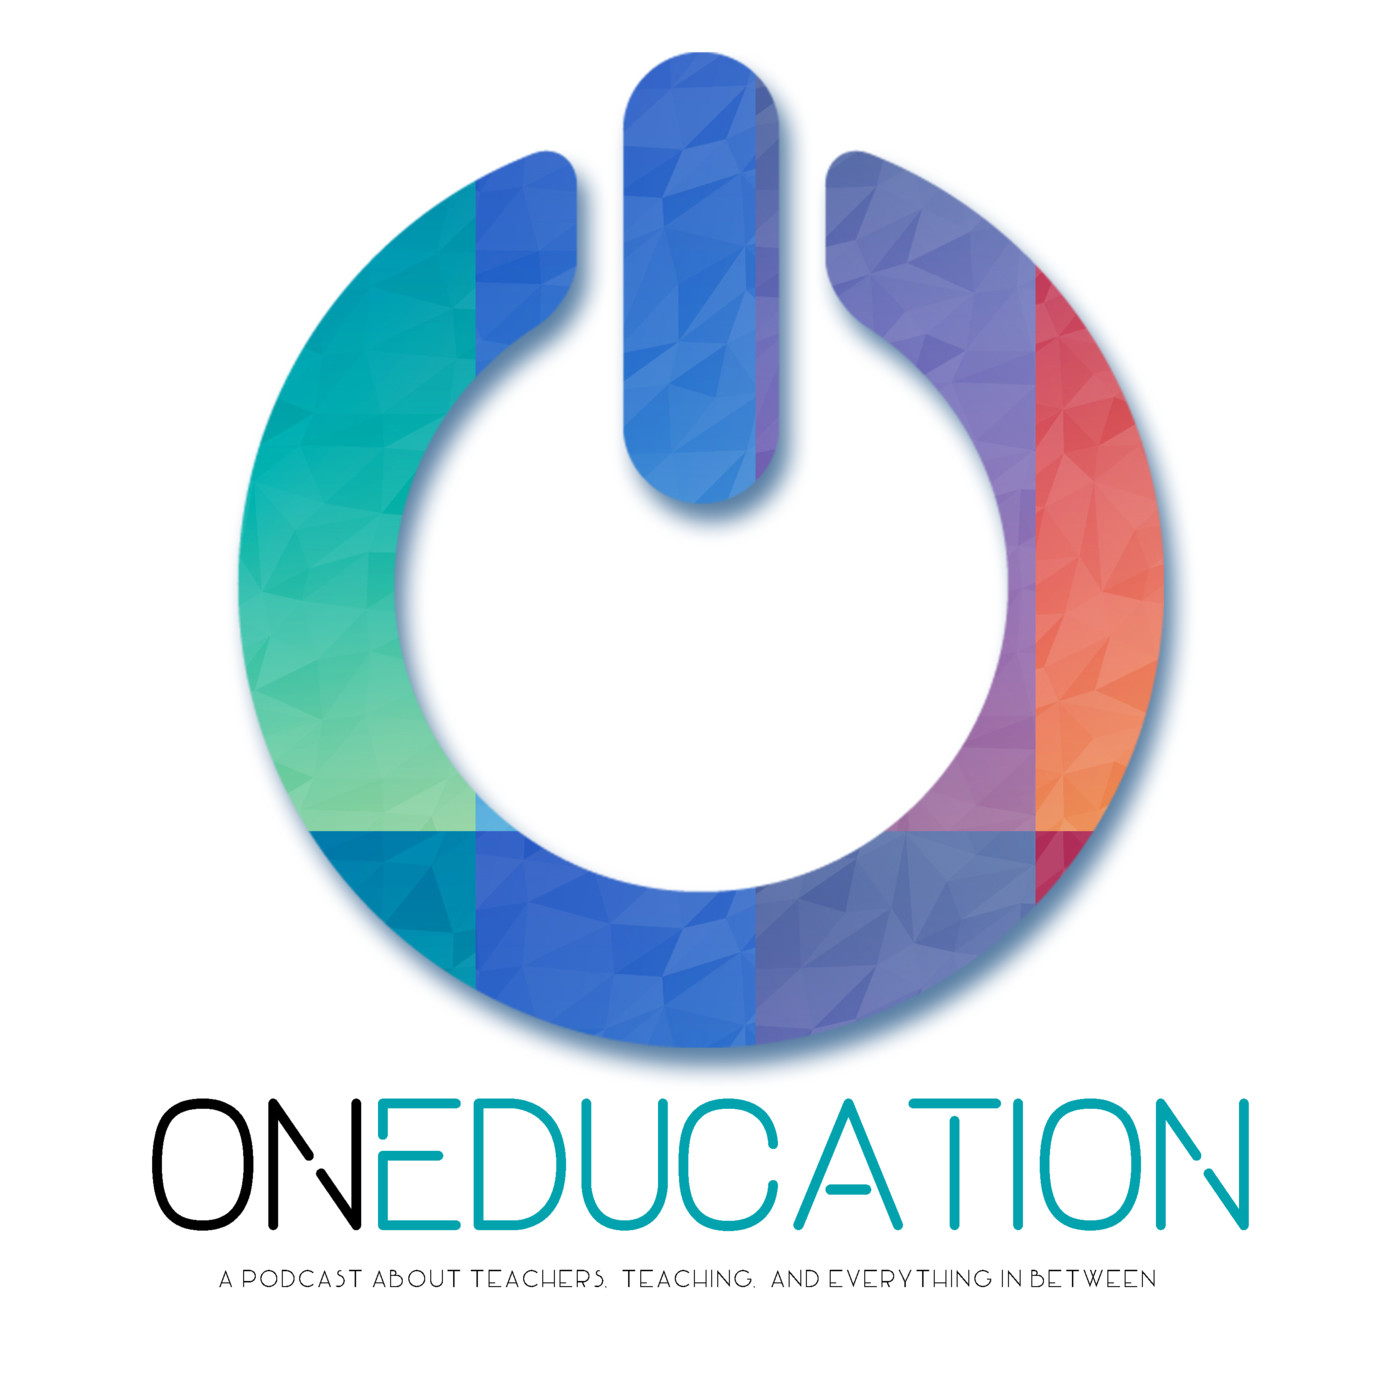 OnEducation Presents: Dave Burgess